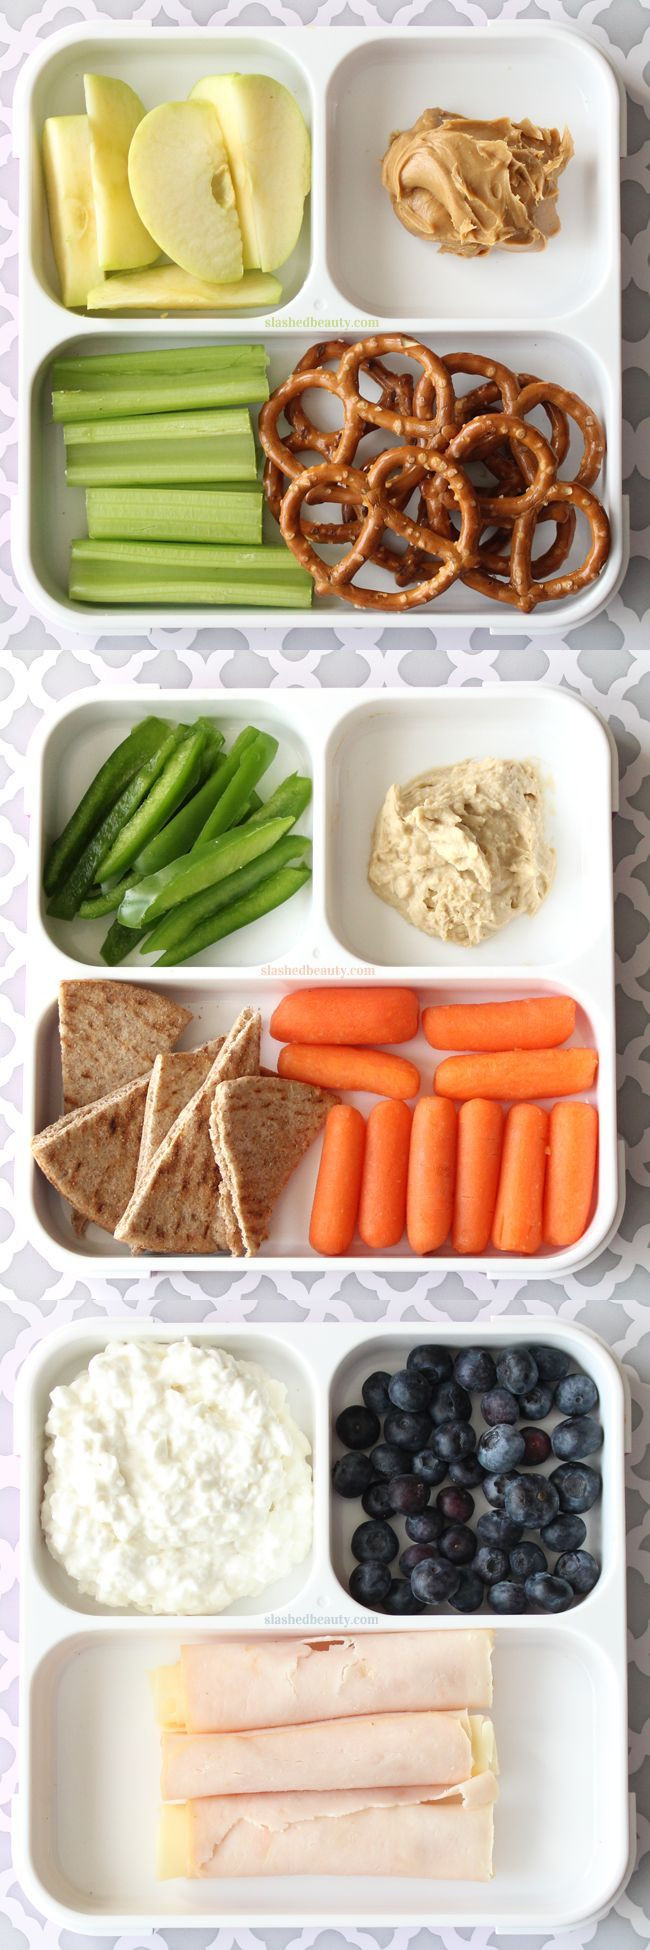 Healthy Snacks Easy
 549 best images about Healthy Snacks For Kids on Pinterest